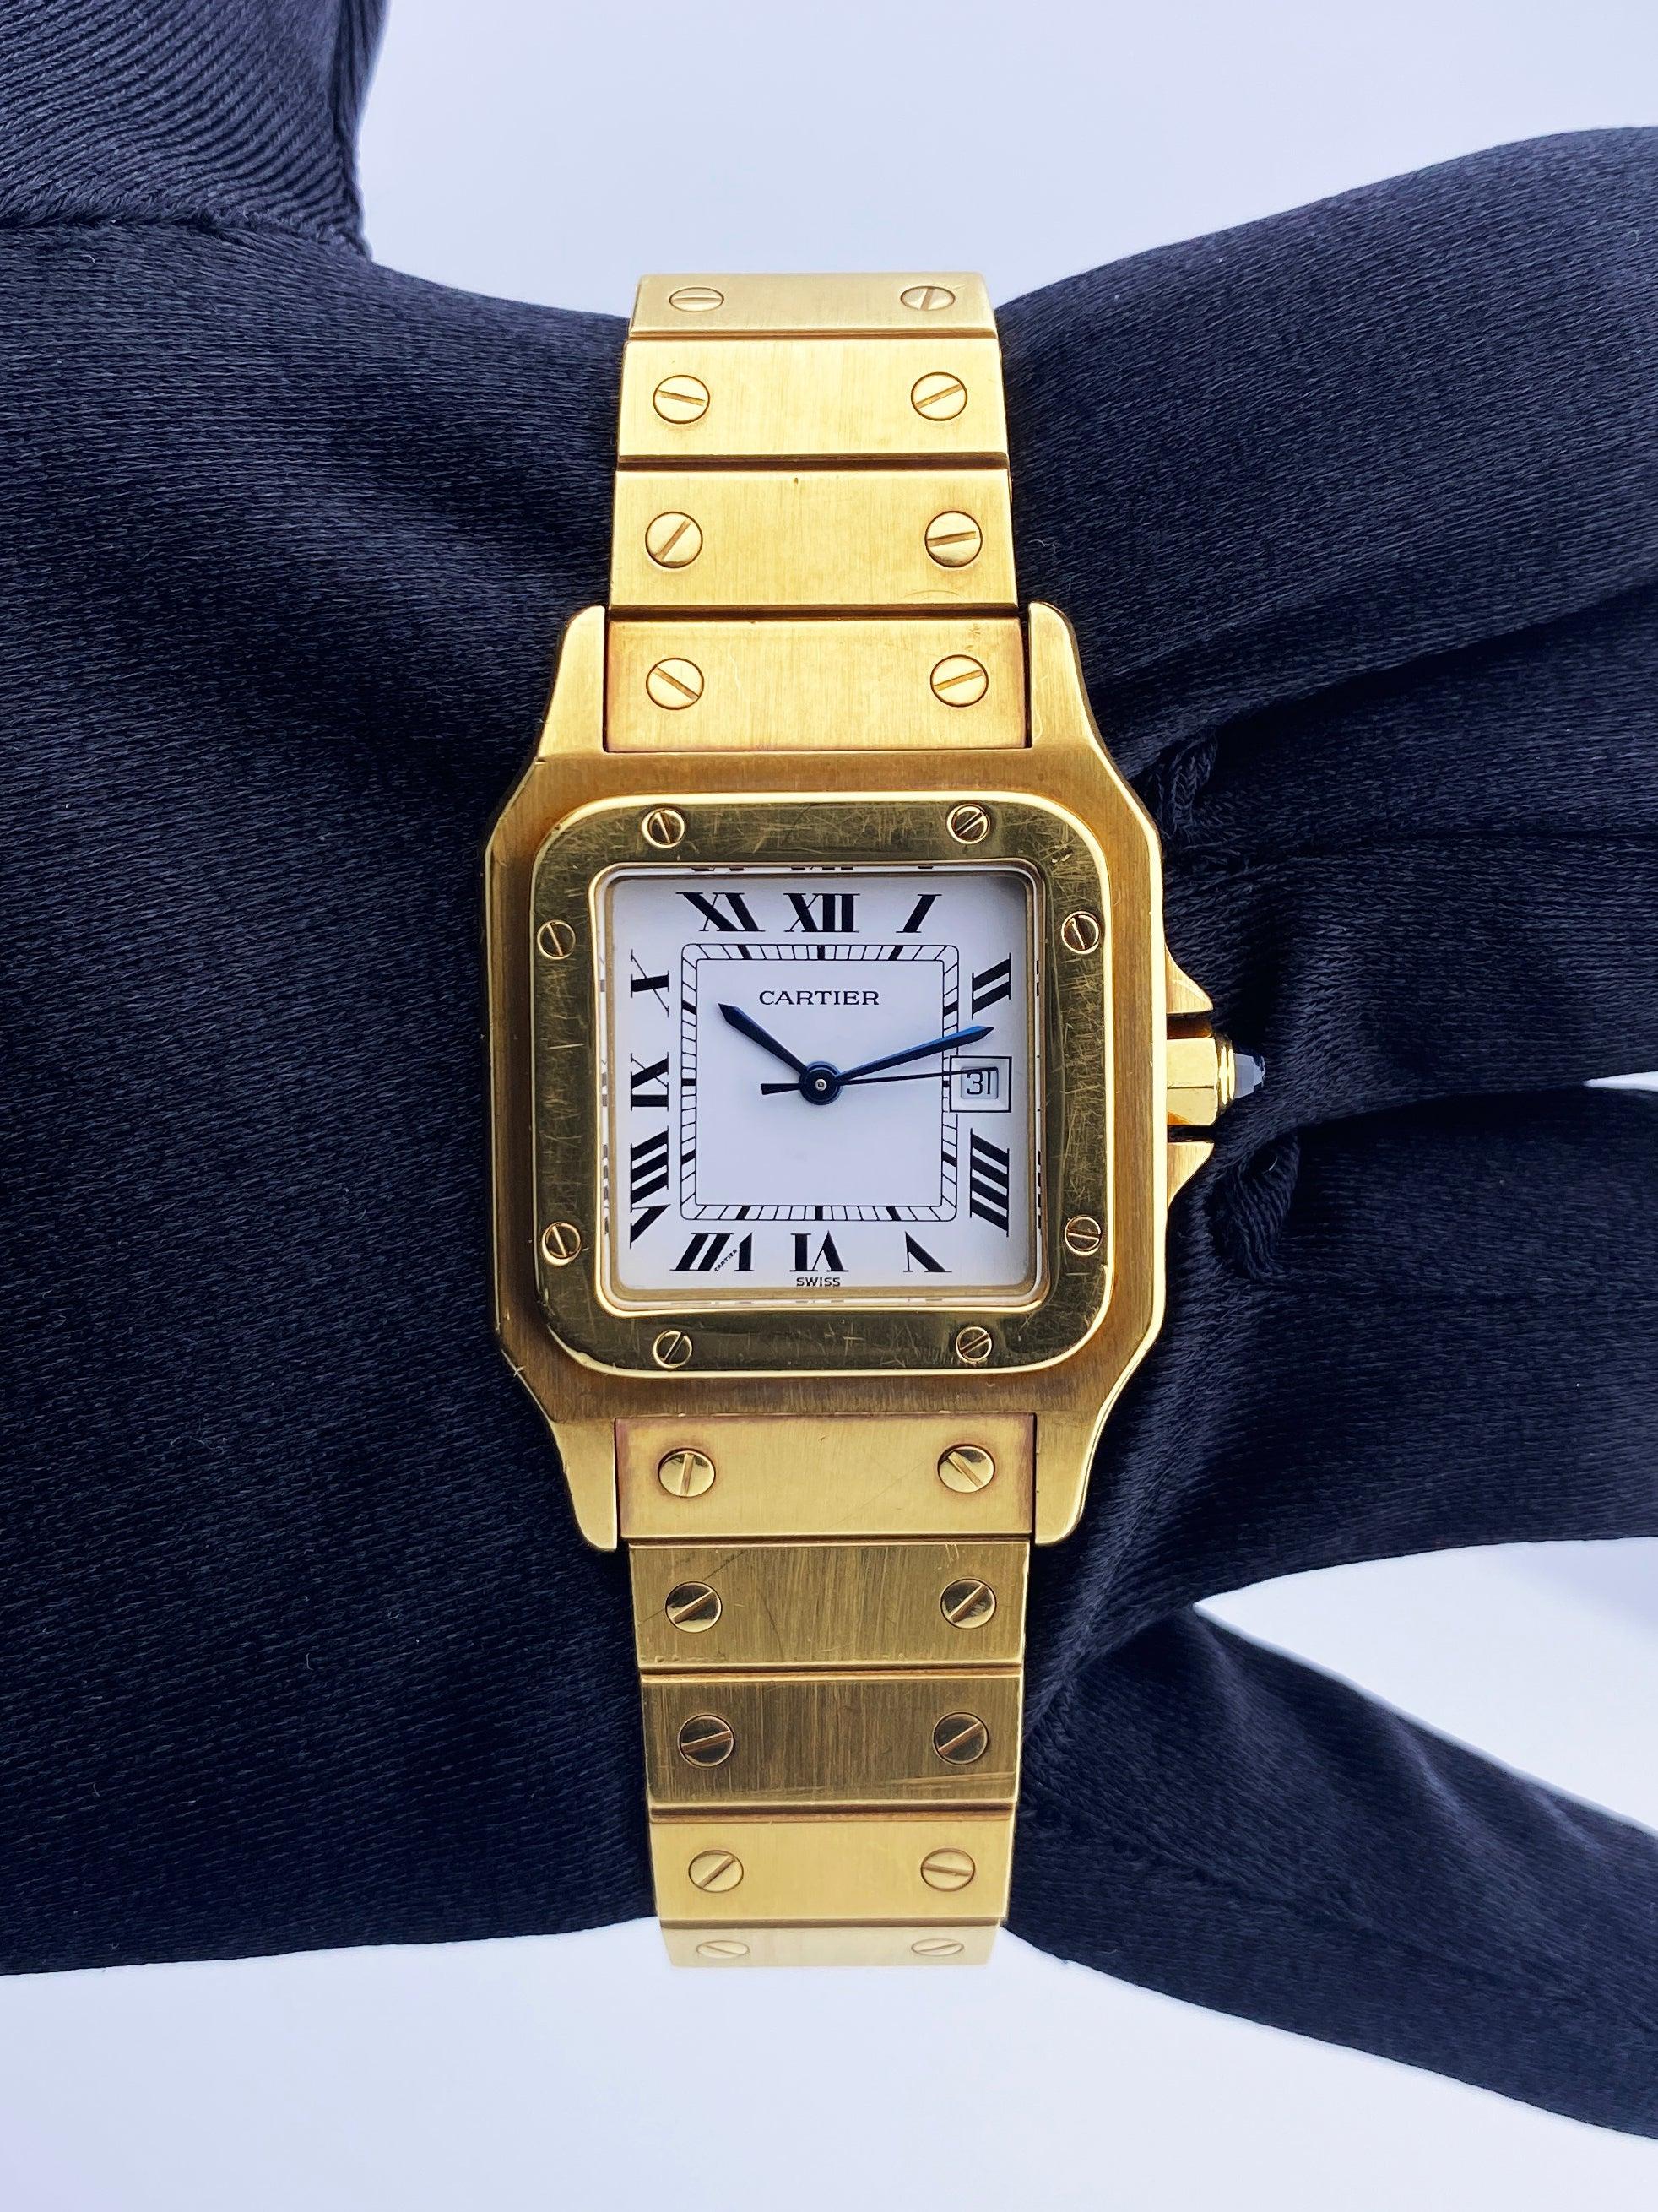 Cartier Santos Mens Watch. 29mm 18k yellow gold case. 18k yellow gold fixed bezel. White dial with blue hands and Roman numeral hour marker. Minute markers on the inner dial. Date display at the 3 o'clock position. 18k yellow gold bracelet with